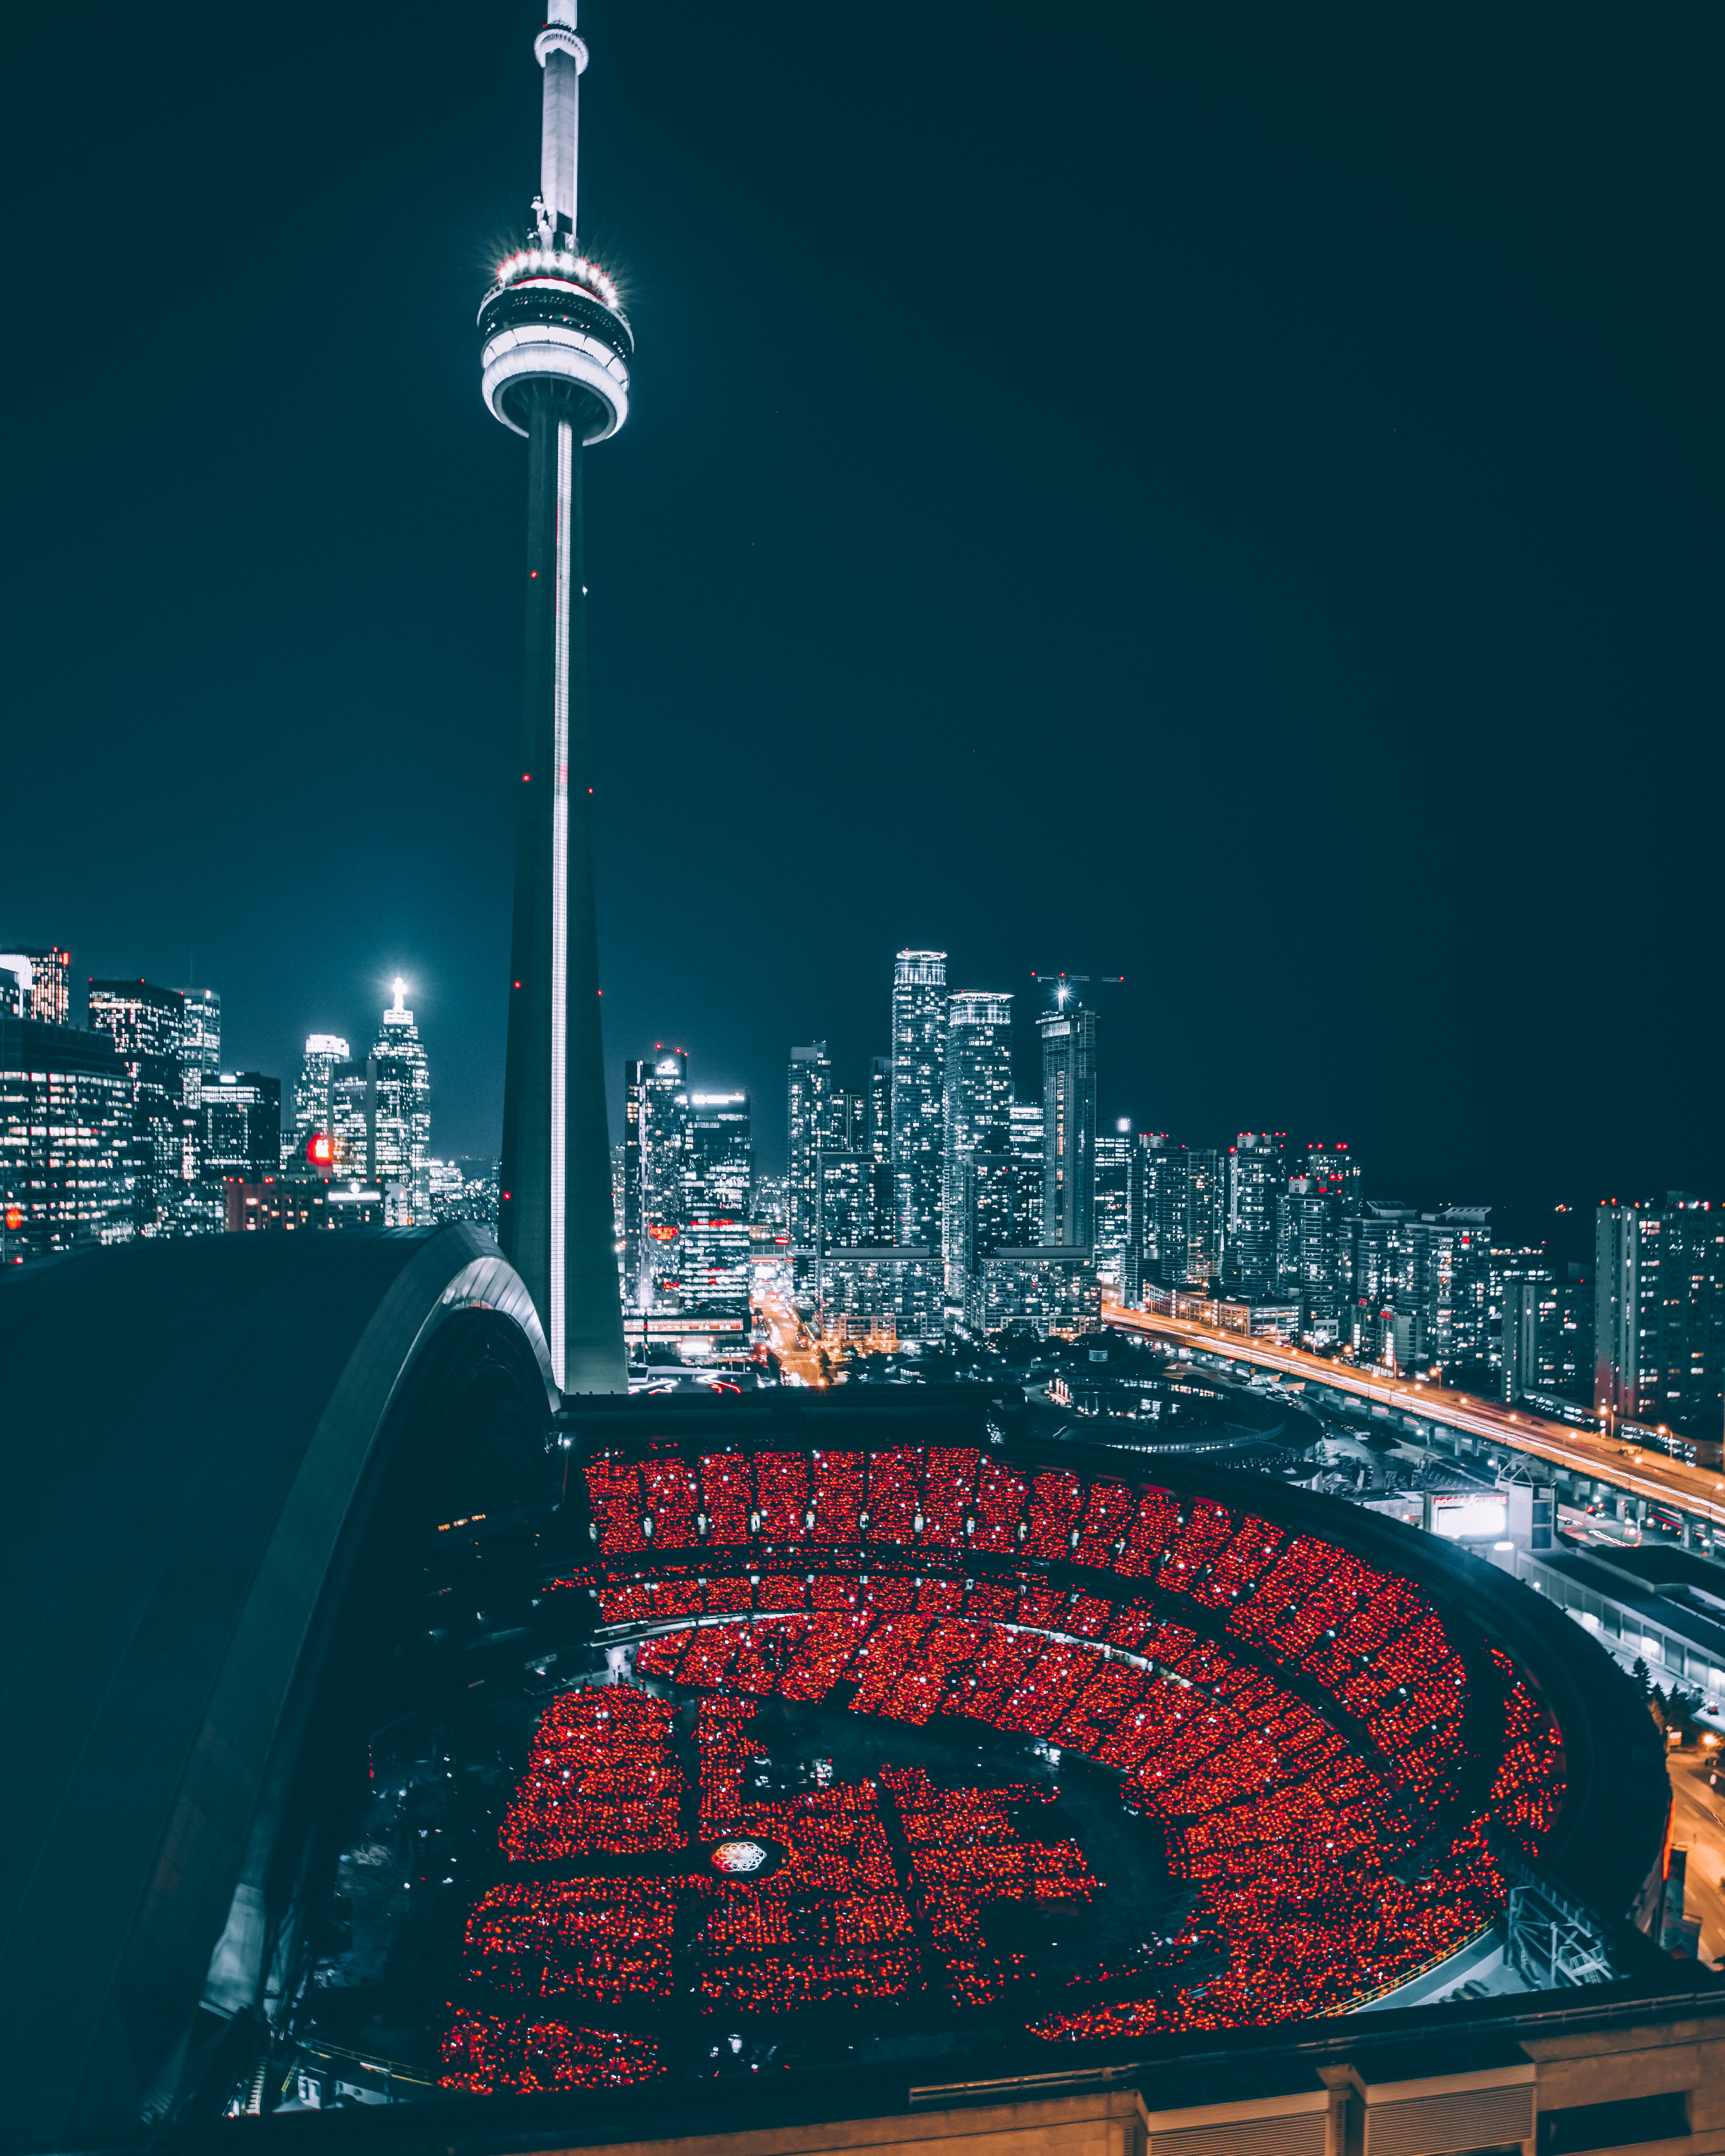 toronto, view from above, canada, cities, night city, skyscrapers lock screen backgrounds